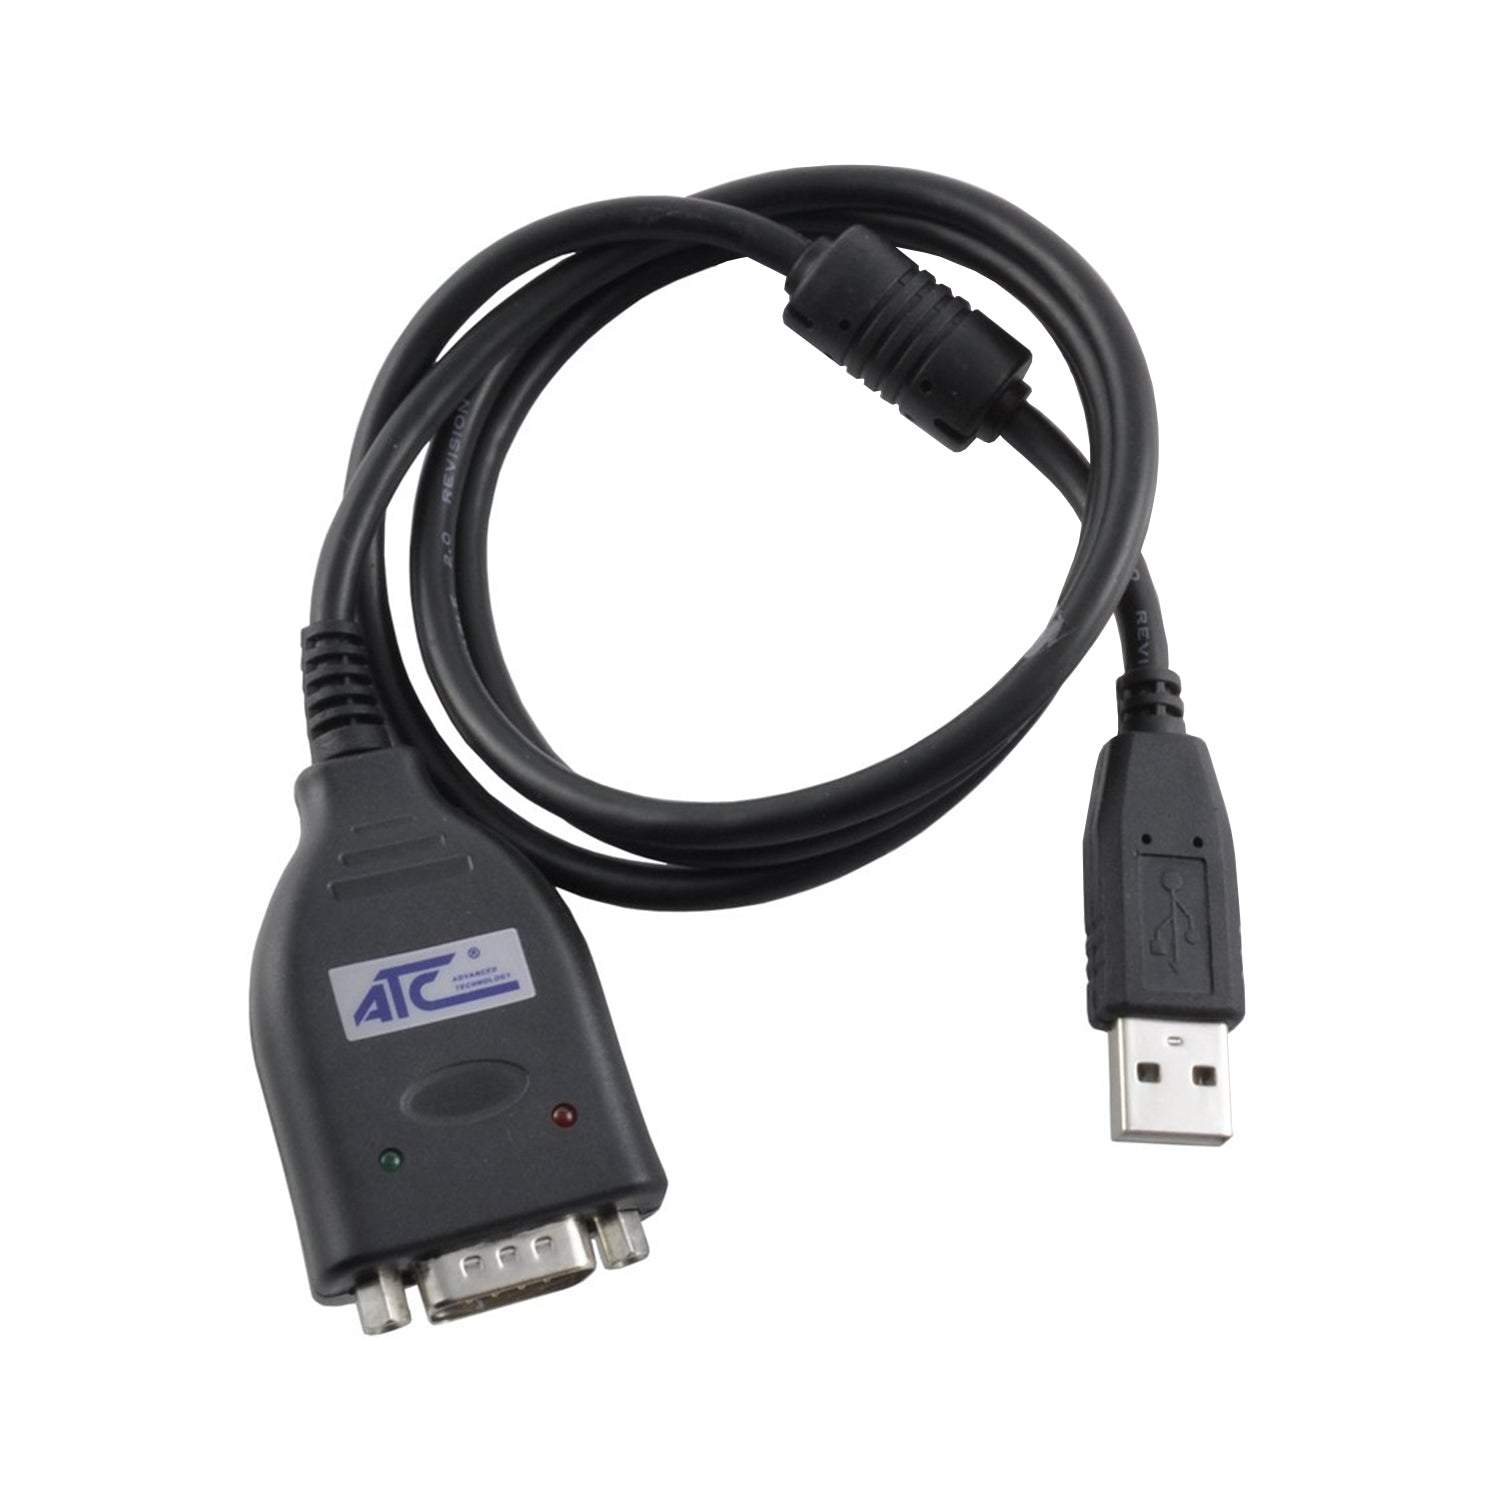 kultur Lyn angre RS232 to USB Adapter - ATC-810 – Grid Connect